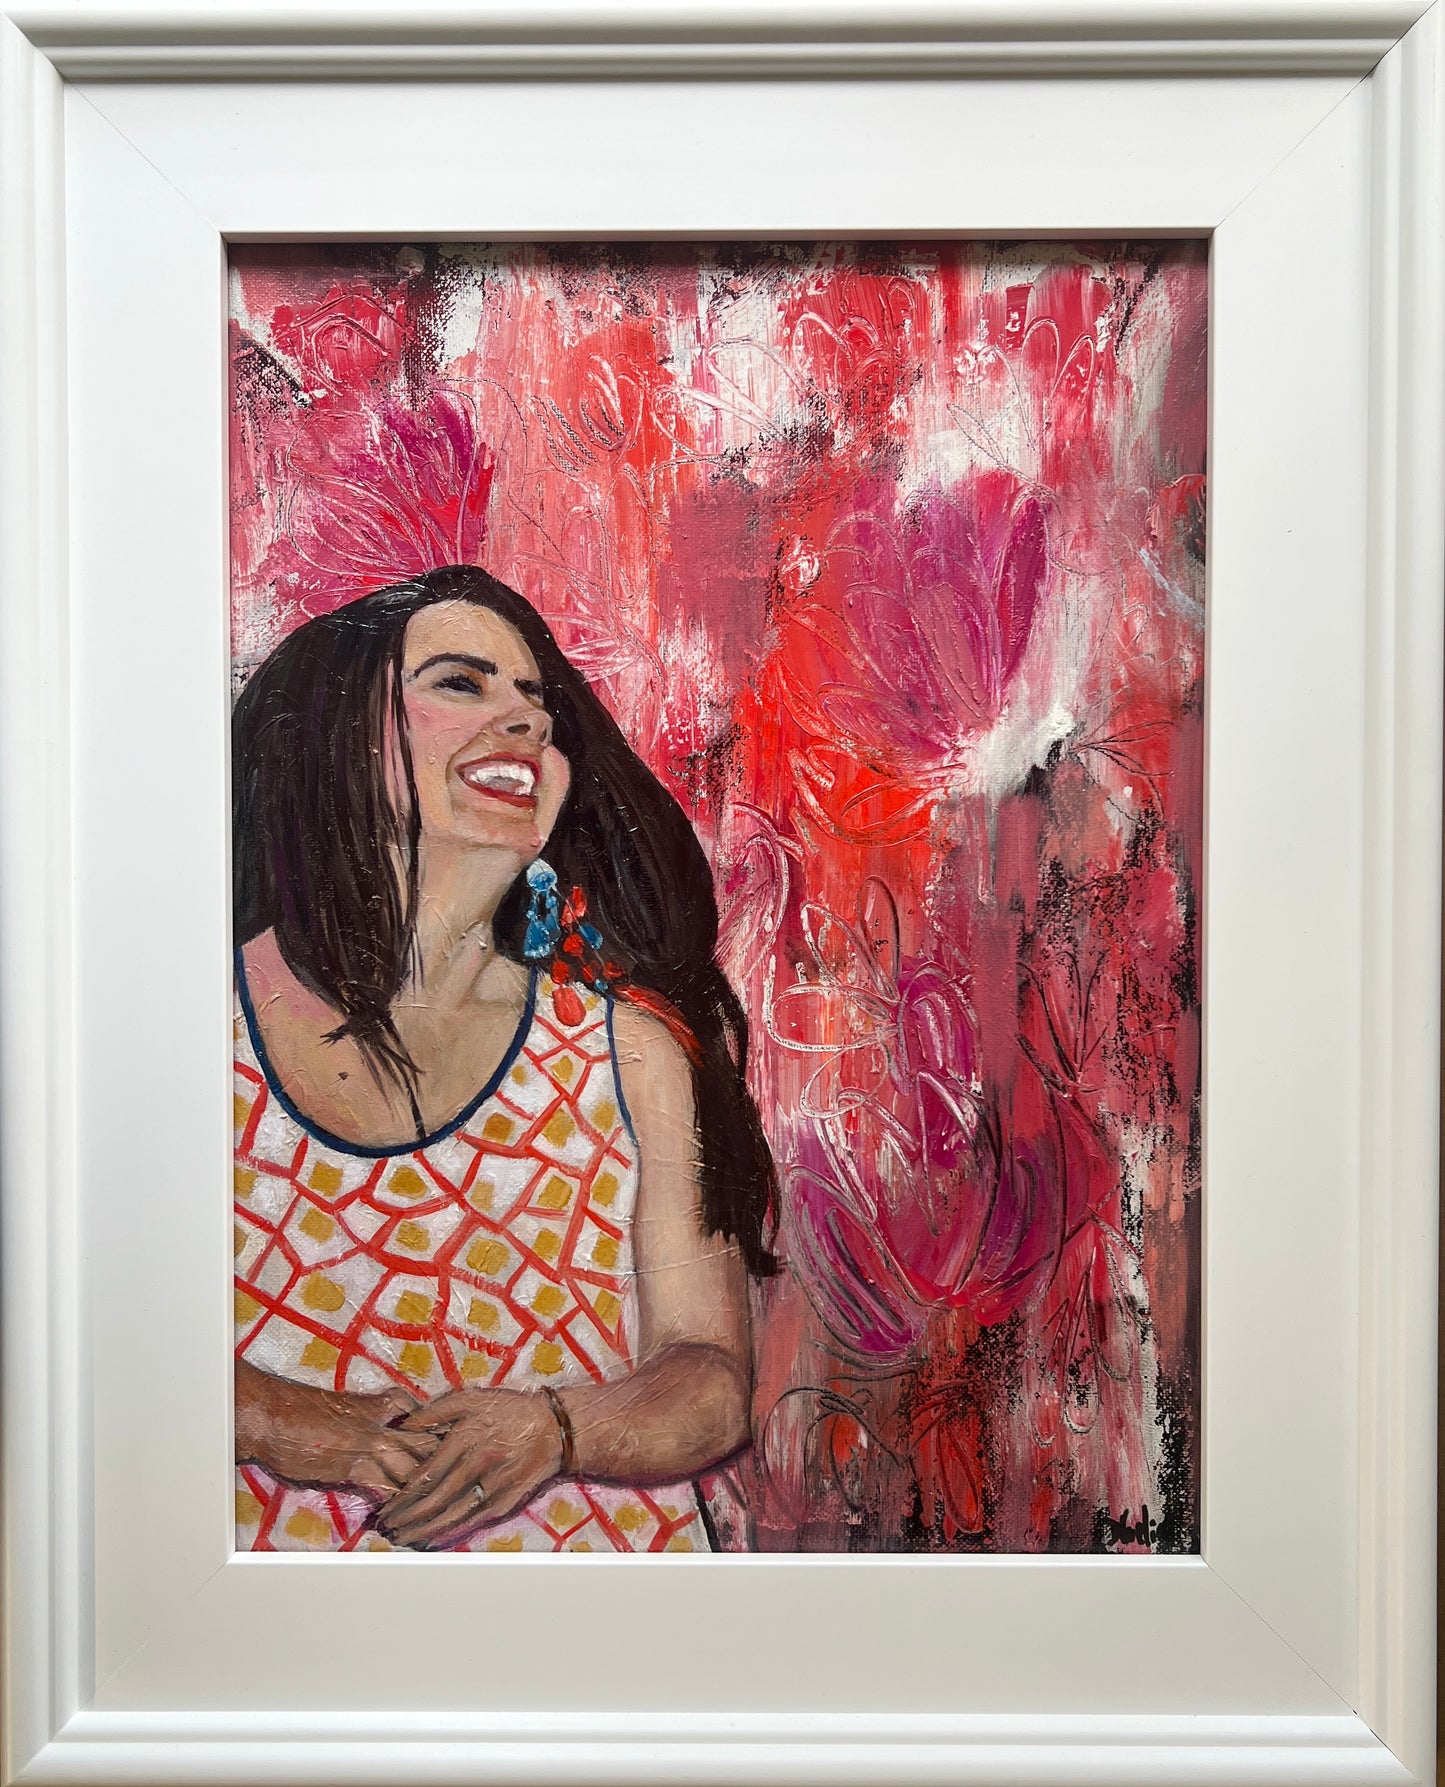 Oil Painting of Latina woman with long black hair lauging with bright orange and pink flowers in the background in a white frame